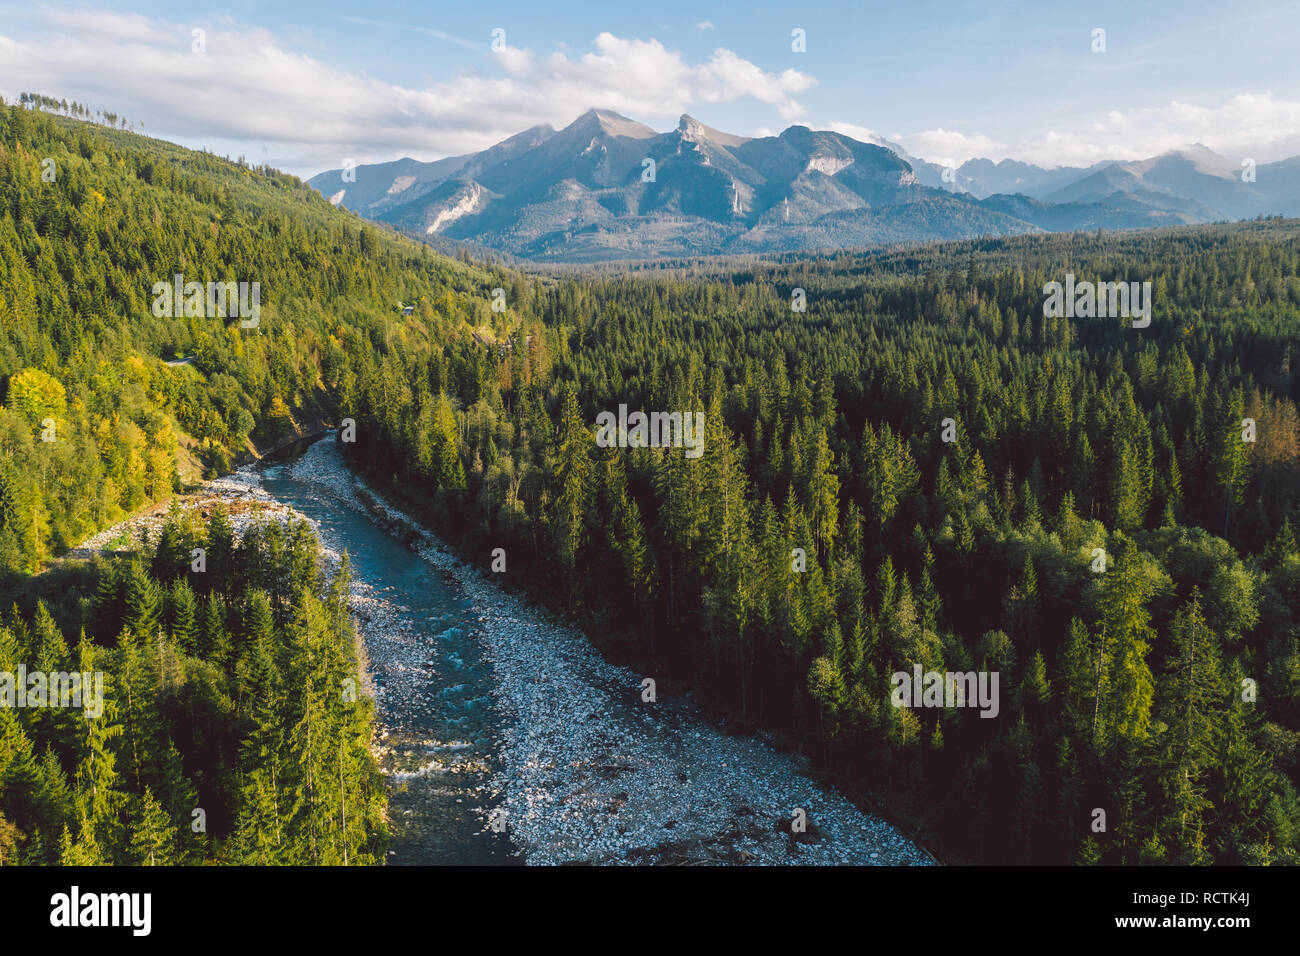 The Bialka river with Tatra mountains in the background Stock Photo